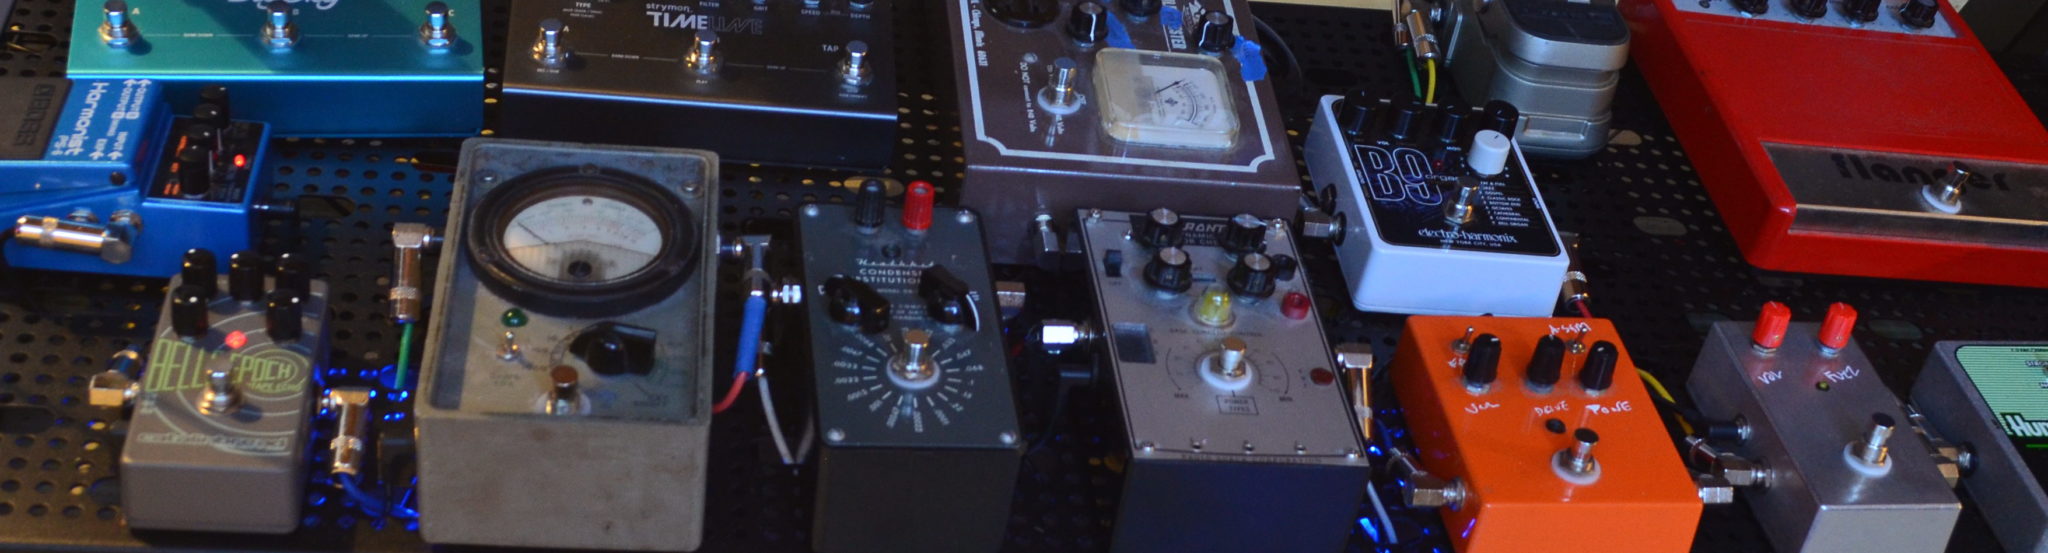 Using Guitar Pedals with Your Eurorack Modular System